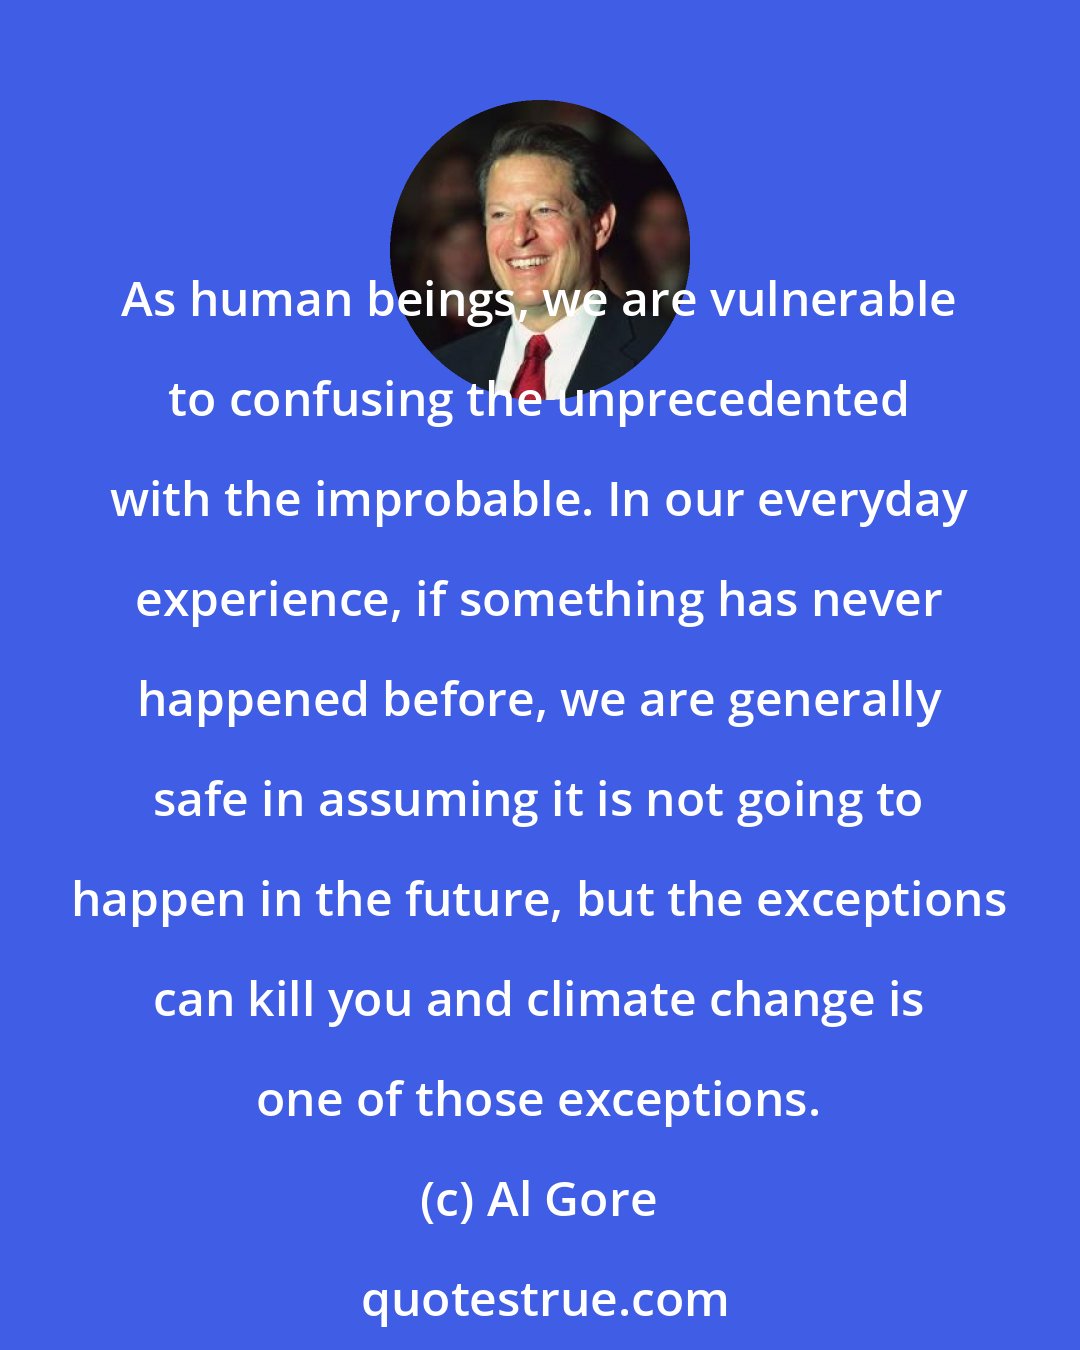 Al Gore: As human beings, we are vulnerable to confusing the unprecedented with the improbable. In our everyday experience, if something has never happened before, we are generally safe in assuming it is not going to happen in the future, but the exceptions can kill you and climate change is one of those exceptions.